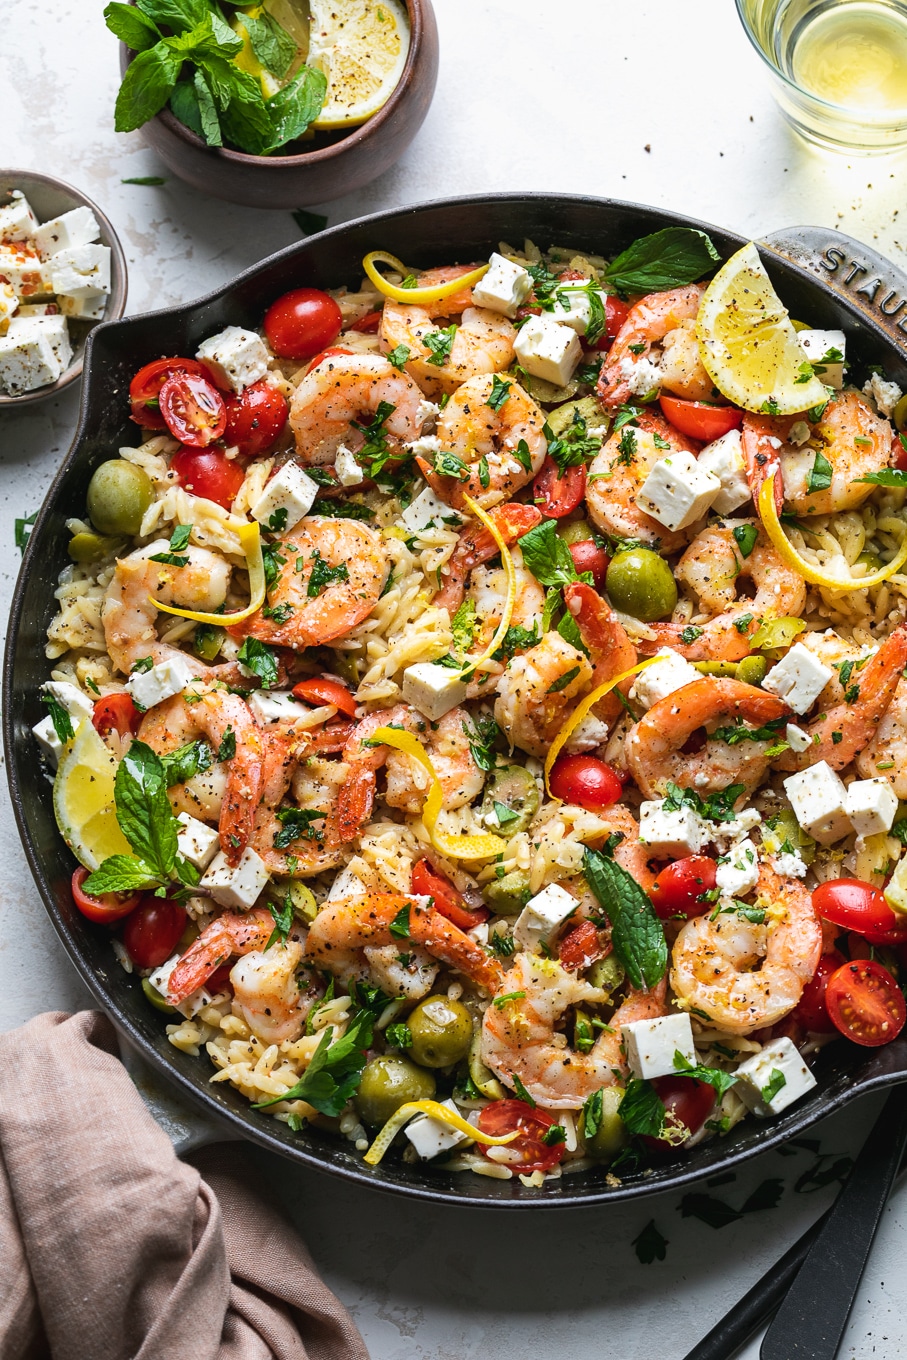 Orzo with Shrimp and Olives Recipe